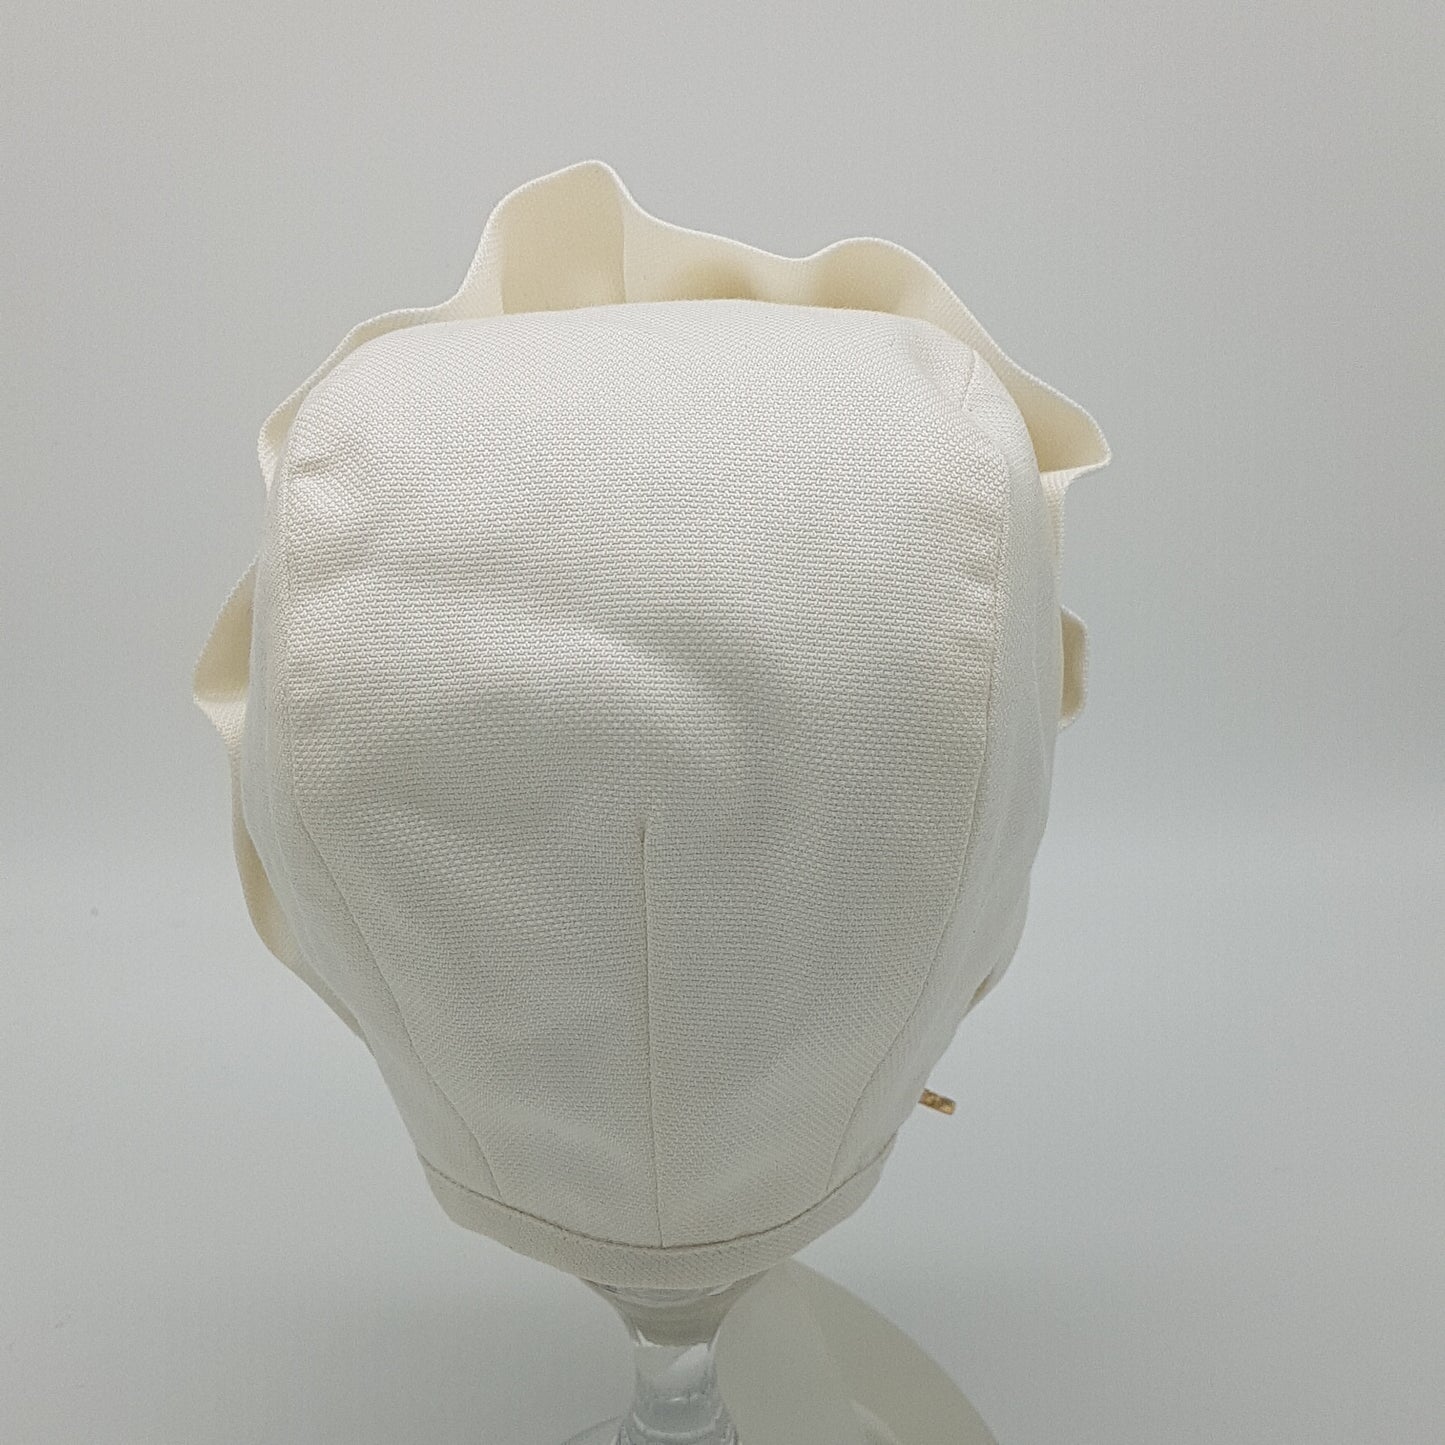 Exclusive Bonnet, Ivory Silk, Cap style with frill and pearl trim